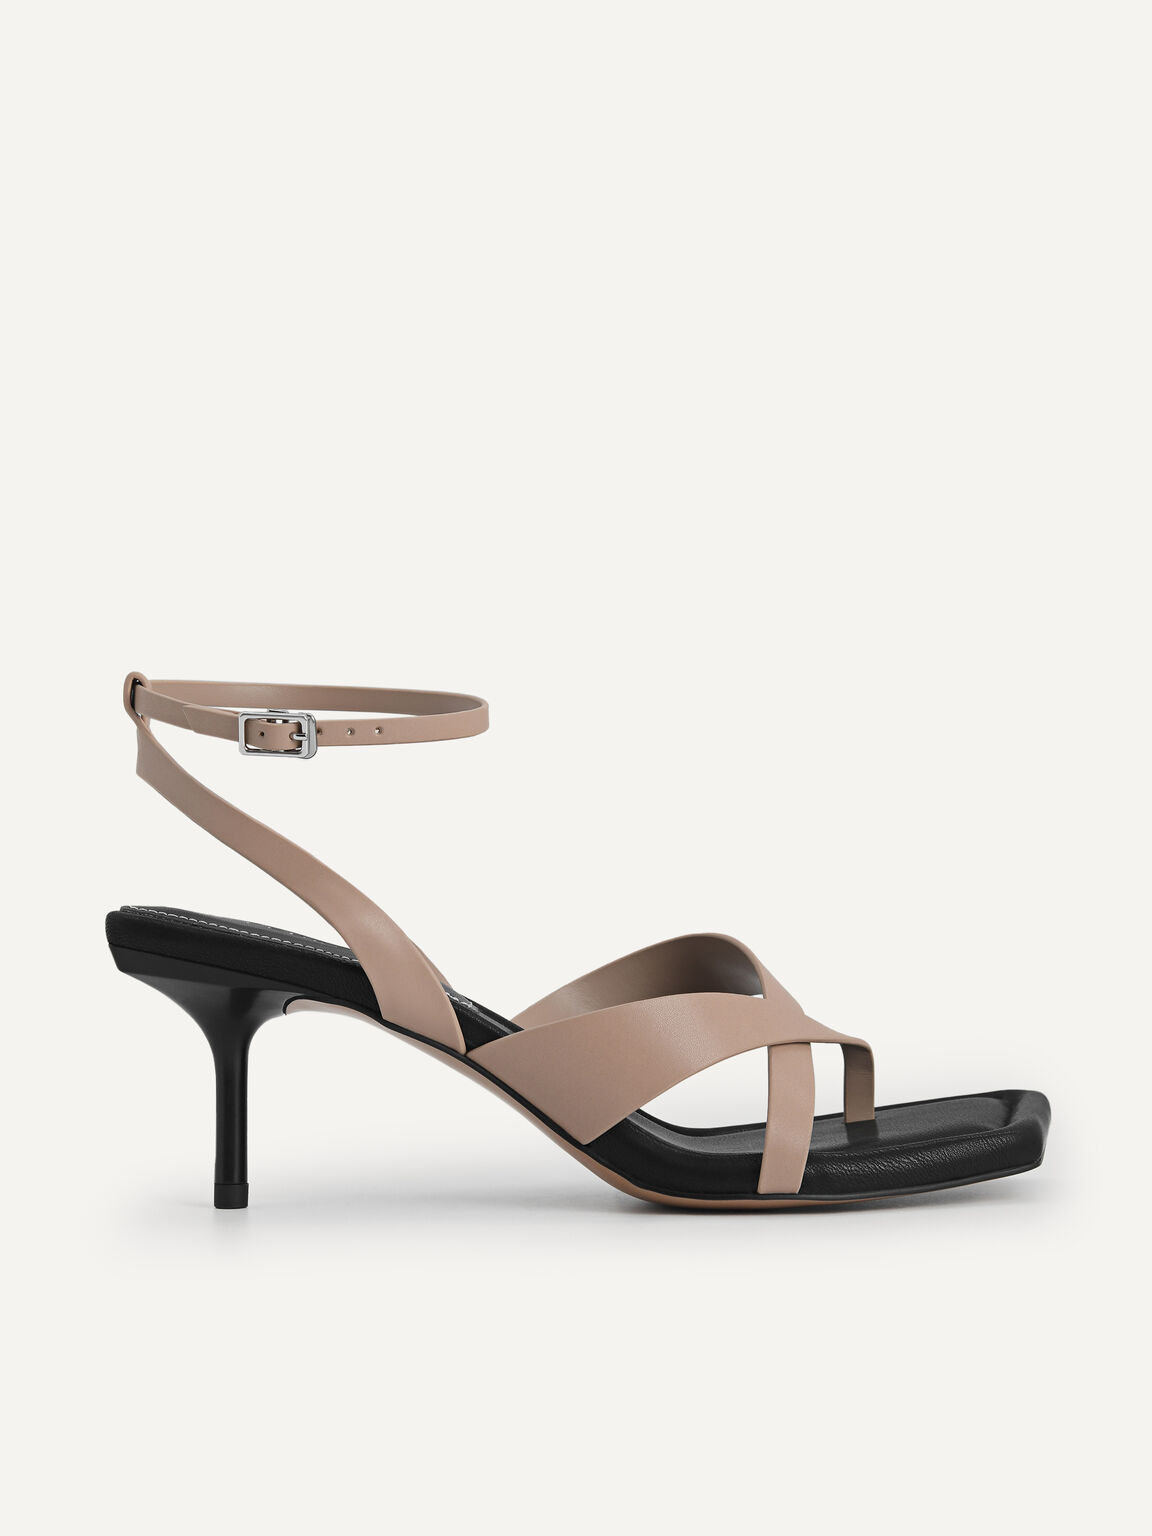 Strappy Square-Toe Heeled Sandals, Taupe